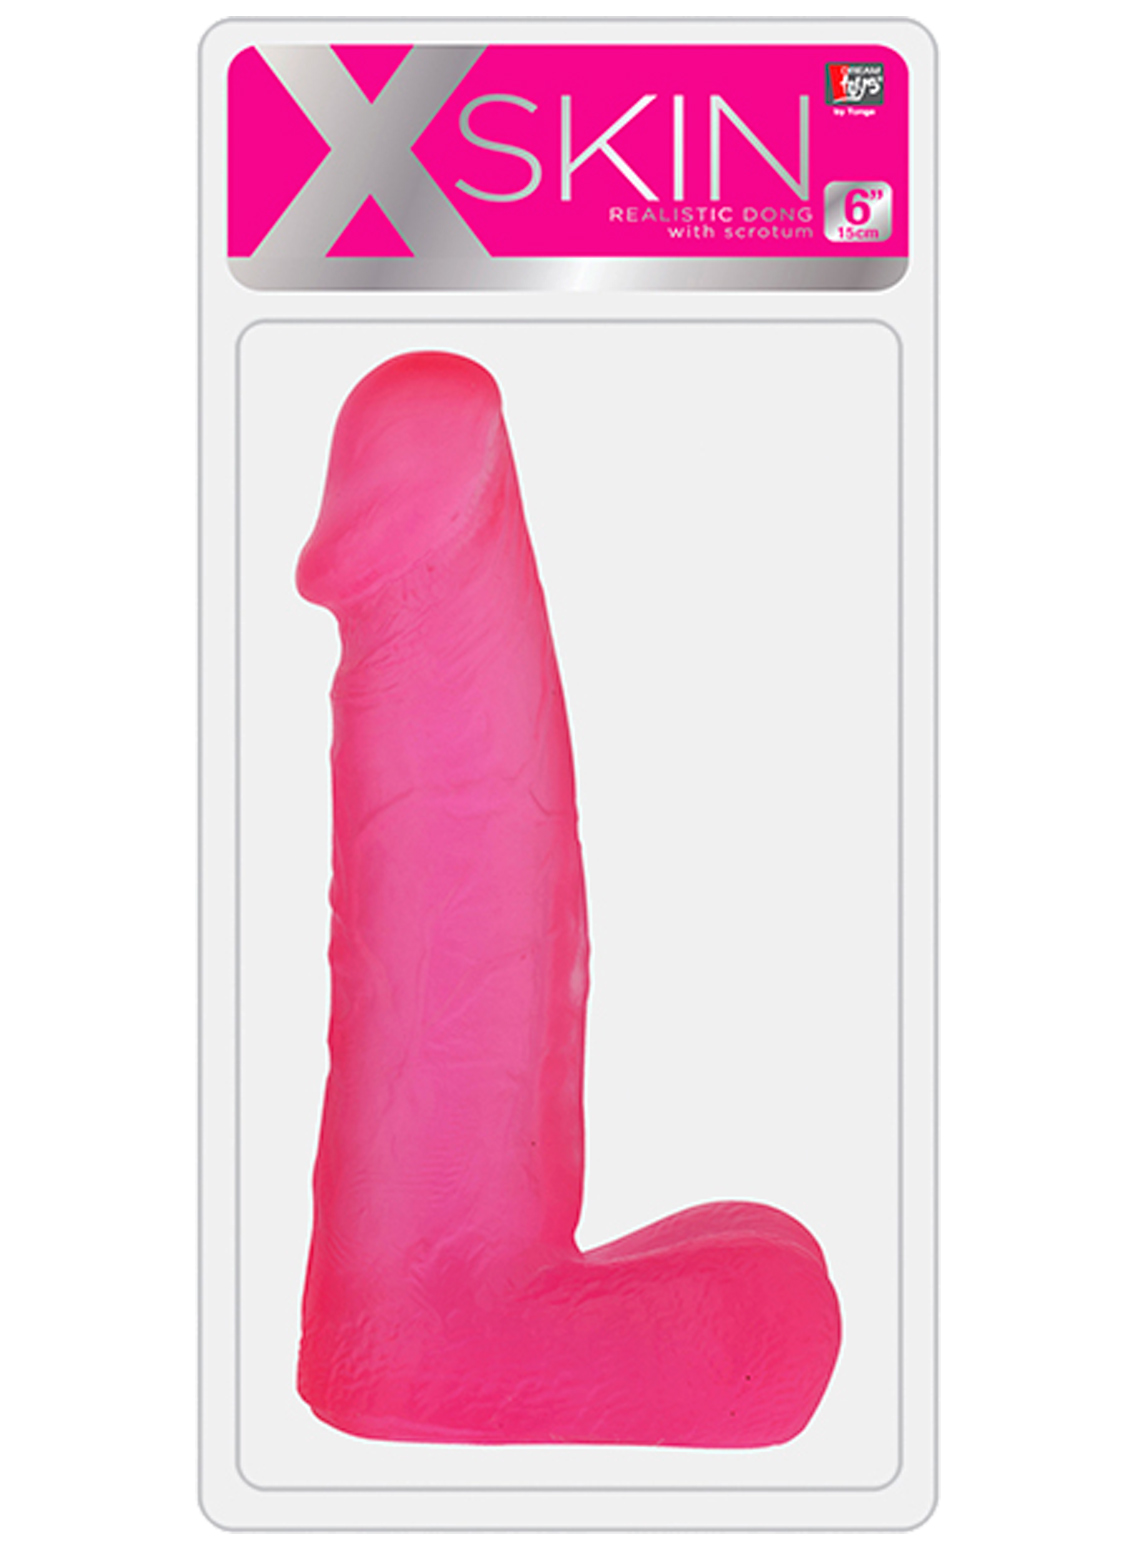 Dream Toys XSkin 6" Realistic Dong